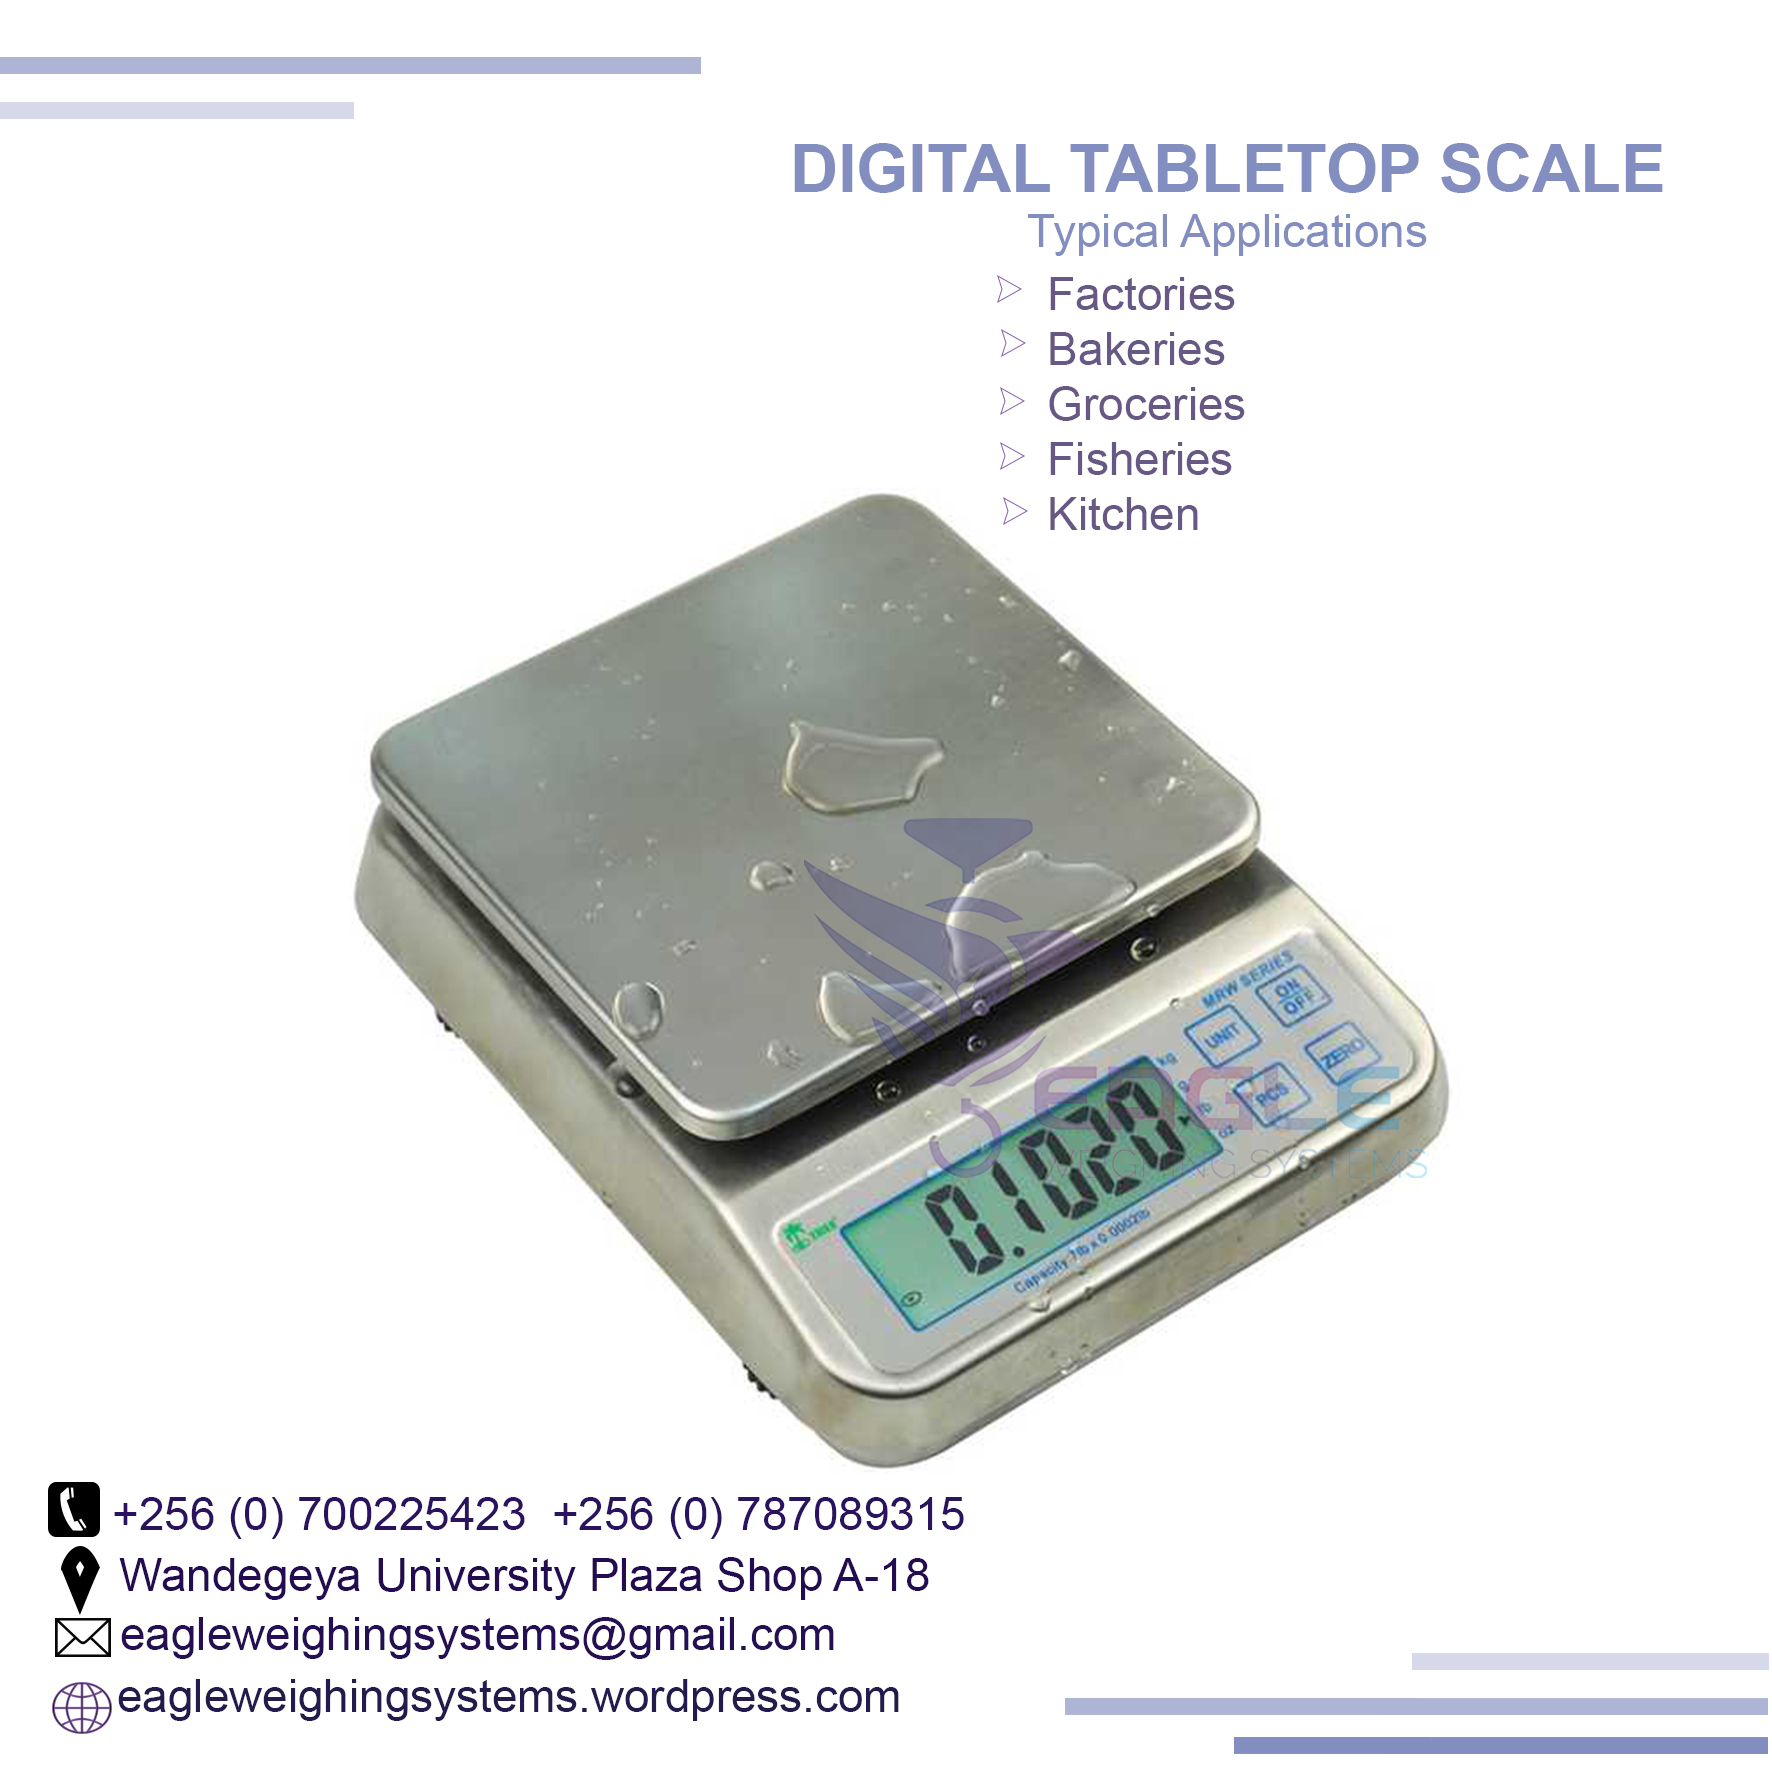 Top-Selling Digital Nutrition Kitchen Food Weight Scale, Kampala Central Division, Central, Uganda